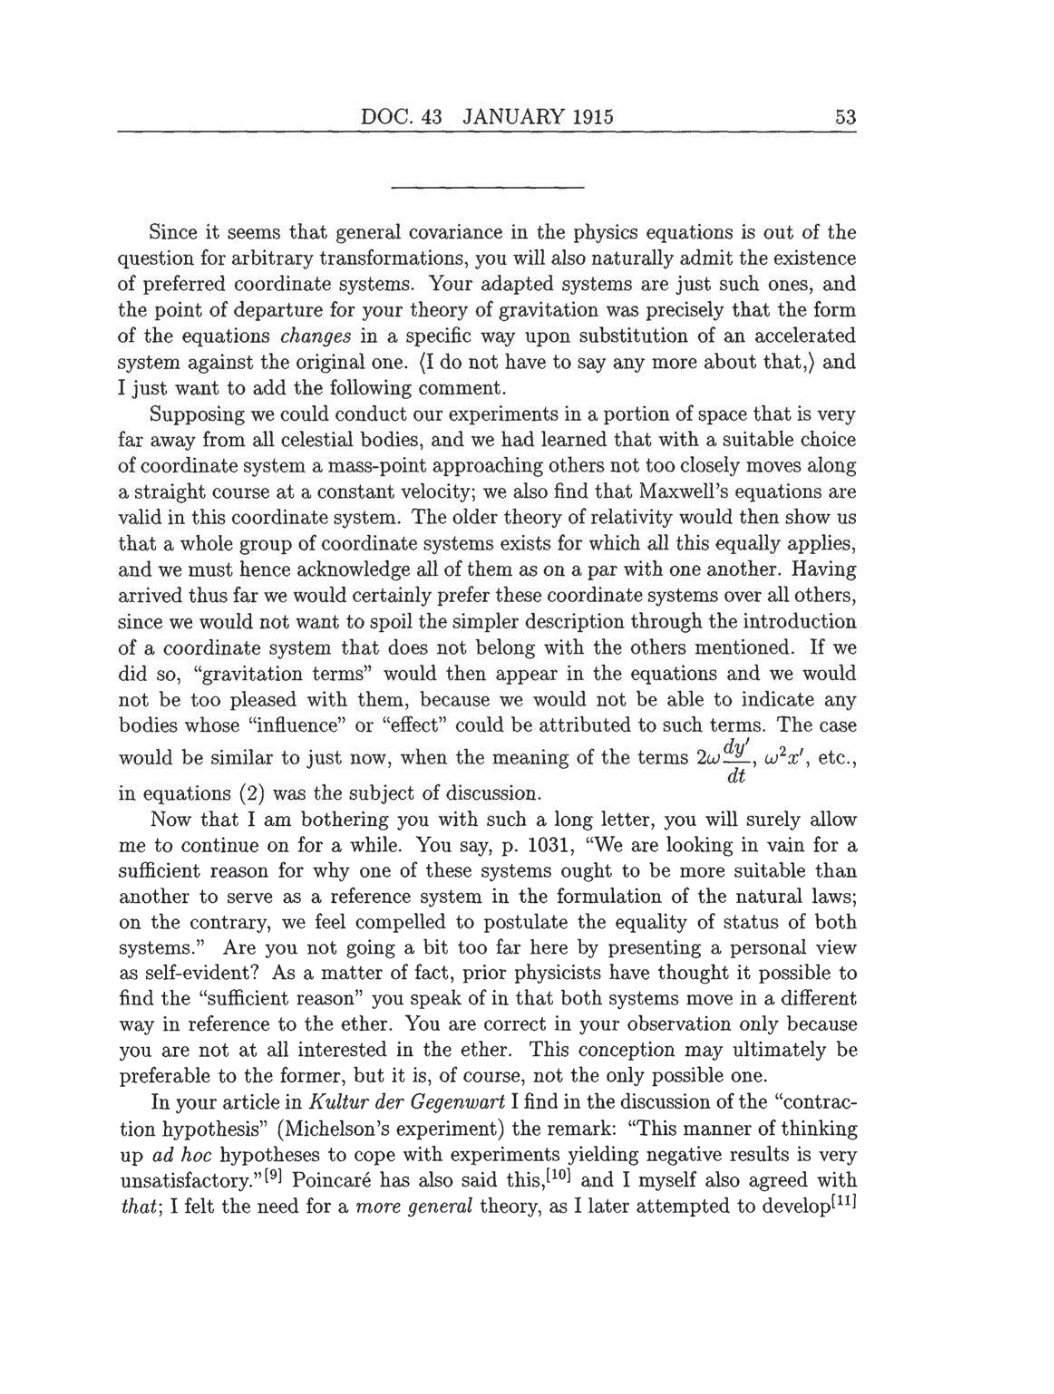 Volume 8: The Berlin Years: Correspondence, 1914-1918 (English translation supplement) page 53